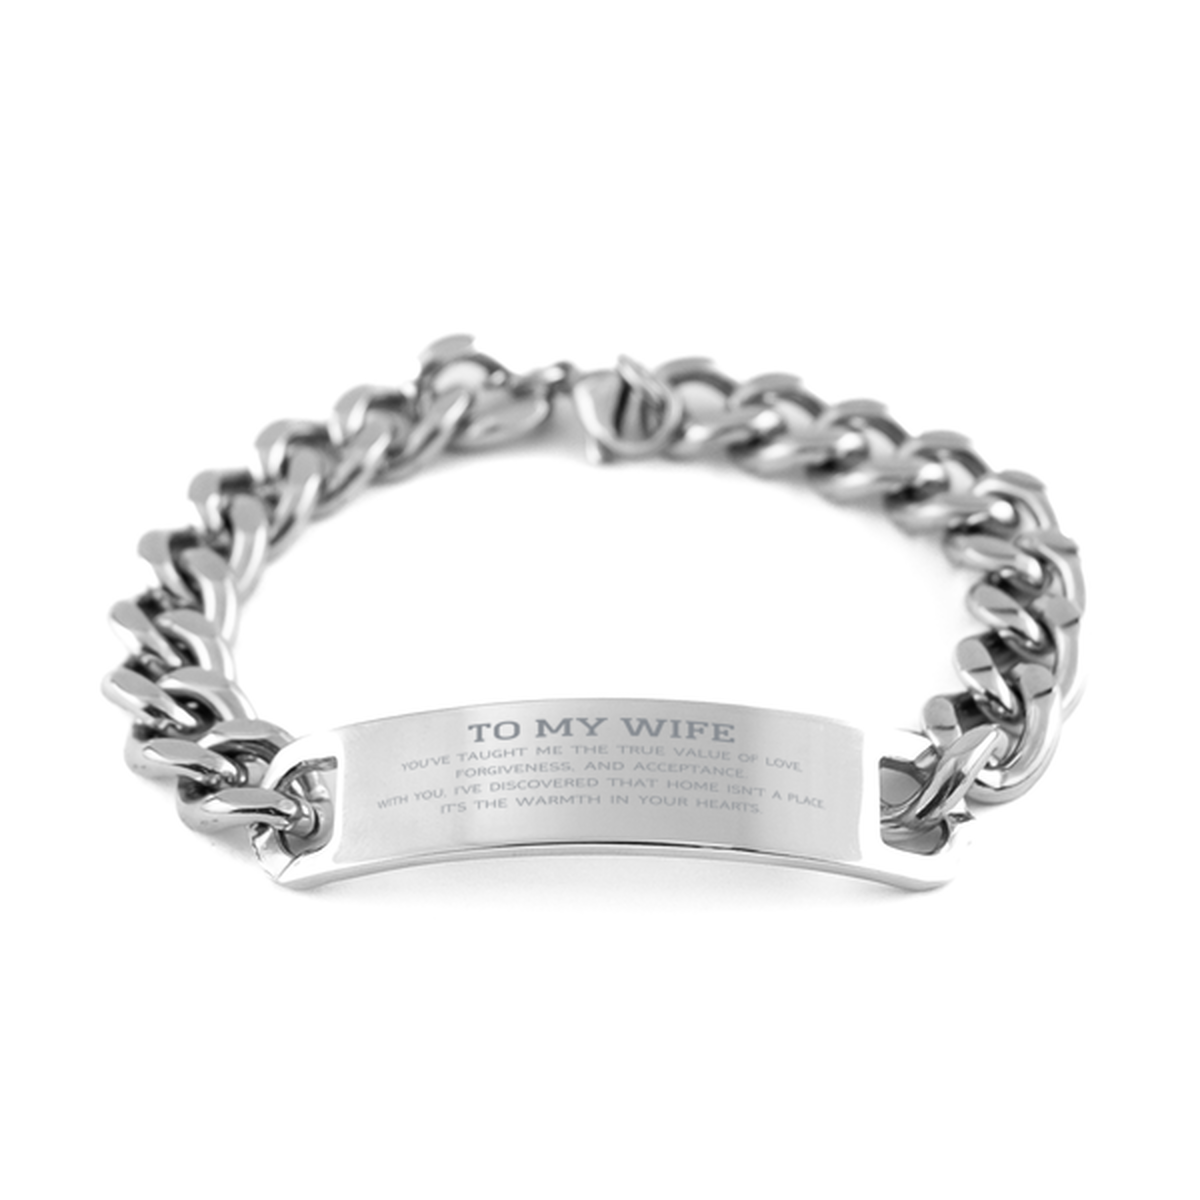 To My Wife Gifts, You've taught me the true value of love, Thank You Gifts For Wife, Birthday Cuban Chain Stainless Steel Bracelet For Wife